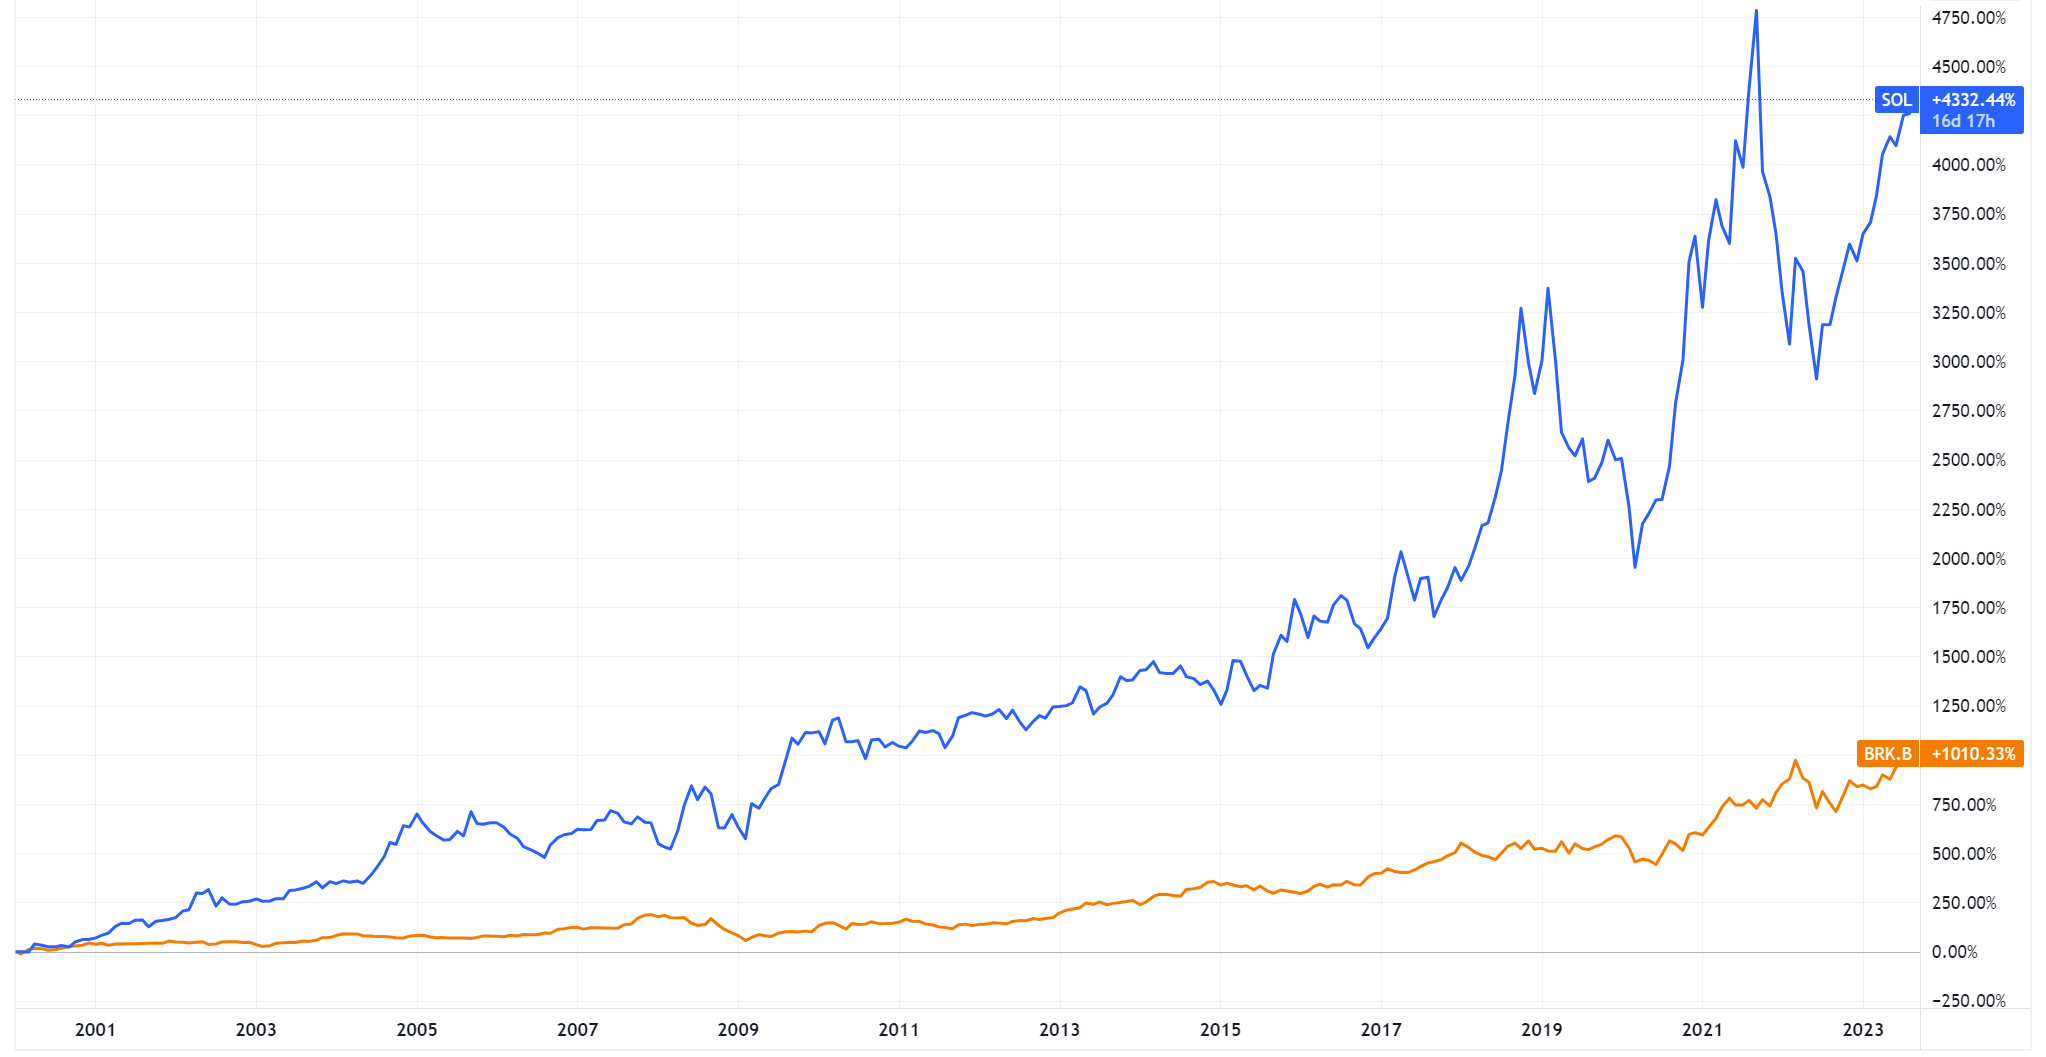 WHSP (Blue) vs. Berkshire Hathaway Class B (Orange) performance, adjusted for dividends since 2000 (Source: TradingView)